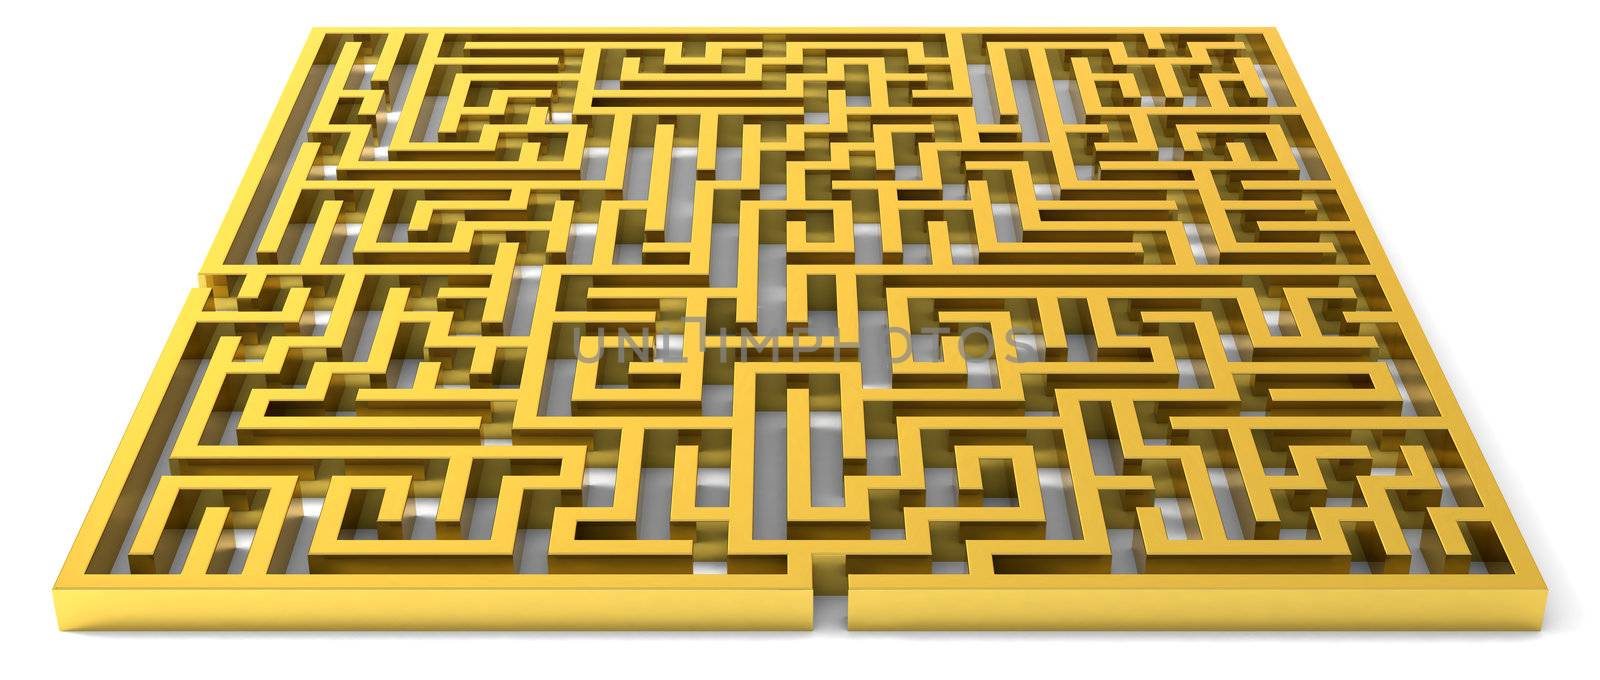 A-mazing golden maze isolated over white. High-res, high quality 3-Render.